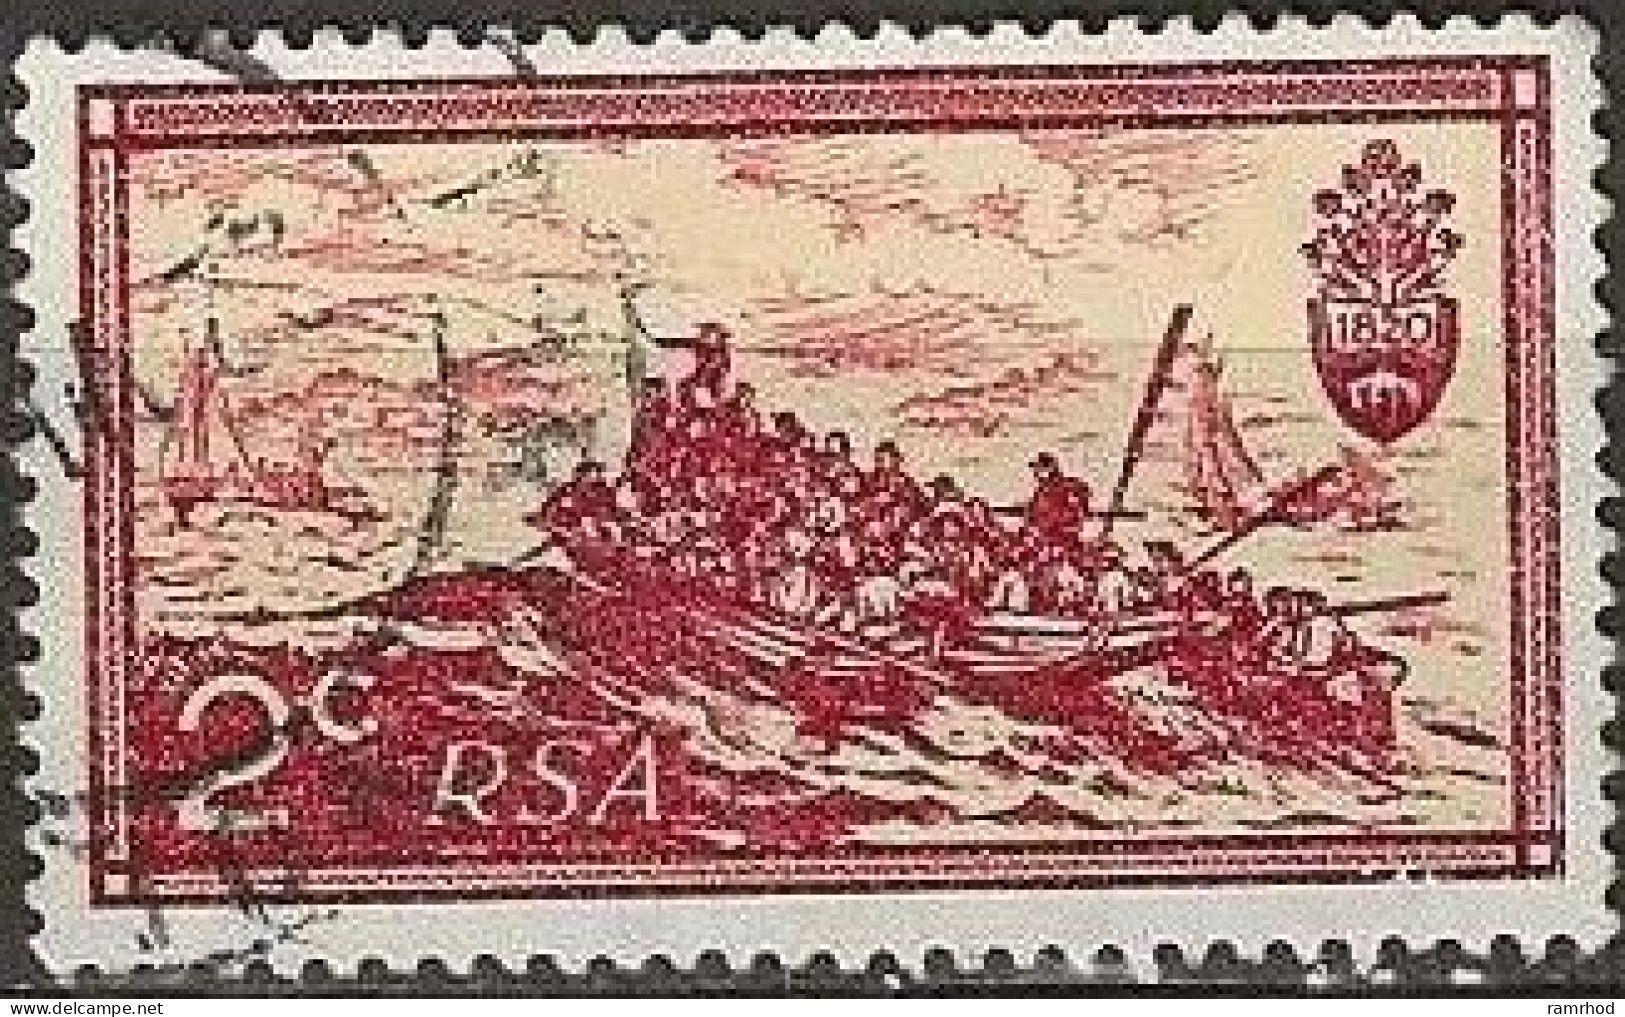 SOUTH AFRICA 1971 Tenth Anniversary Of Republic Of South Africa. - 2c Landing Of British Settlers, 1820 (T. Baines) FU - Gebruikt